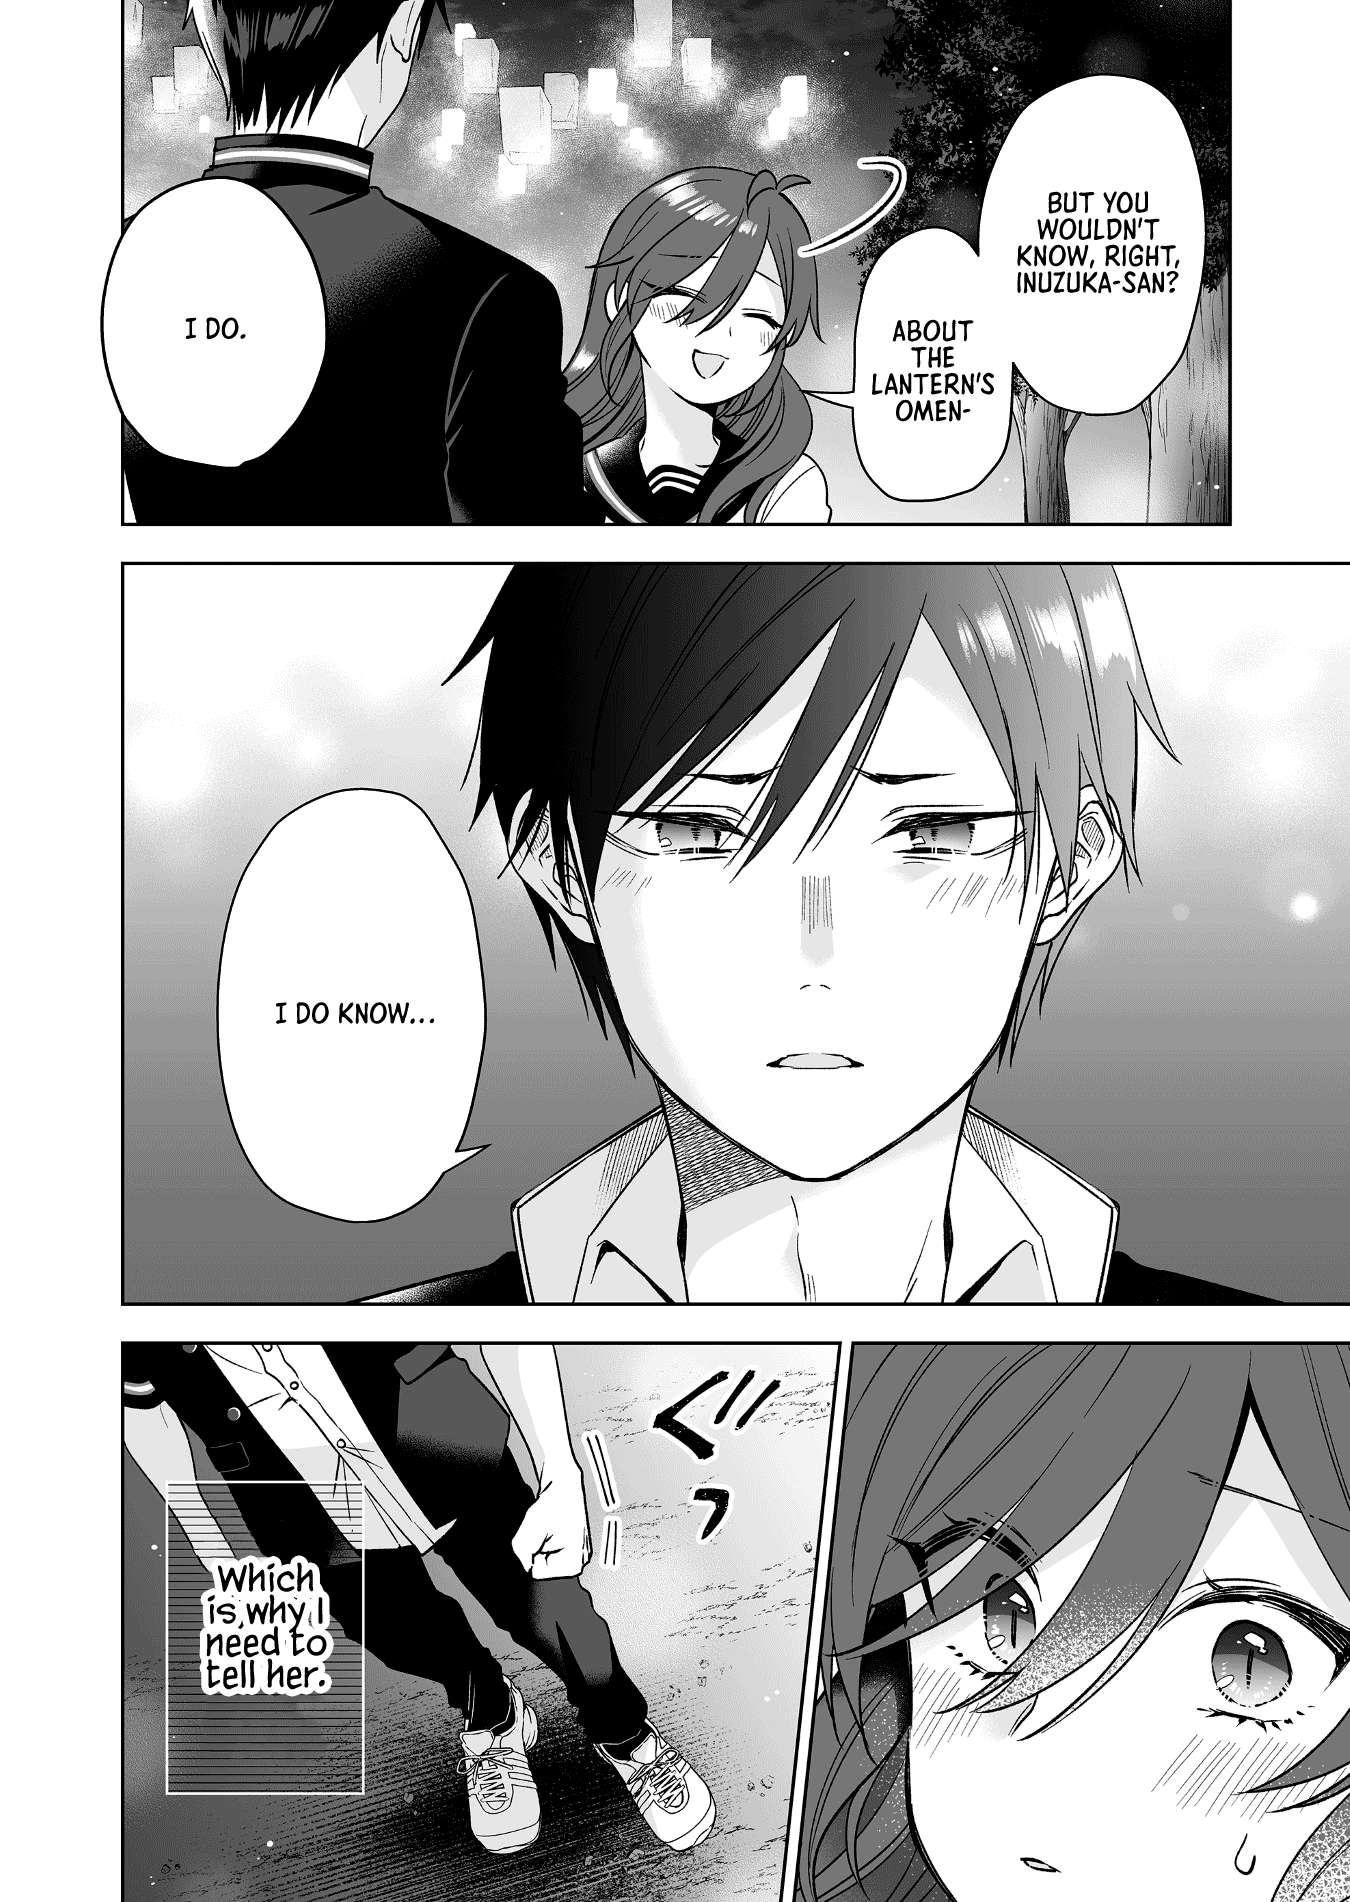 I Fell in Love, so I Tried Livestreaming. chapter 85 page 4